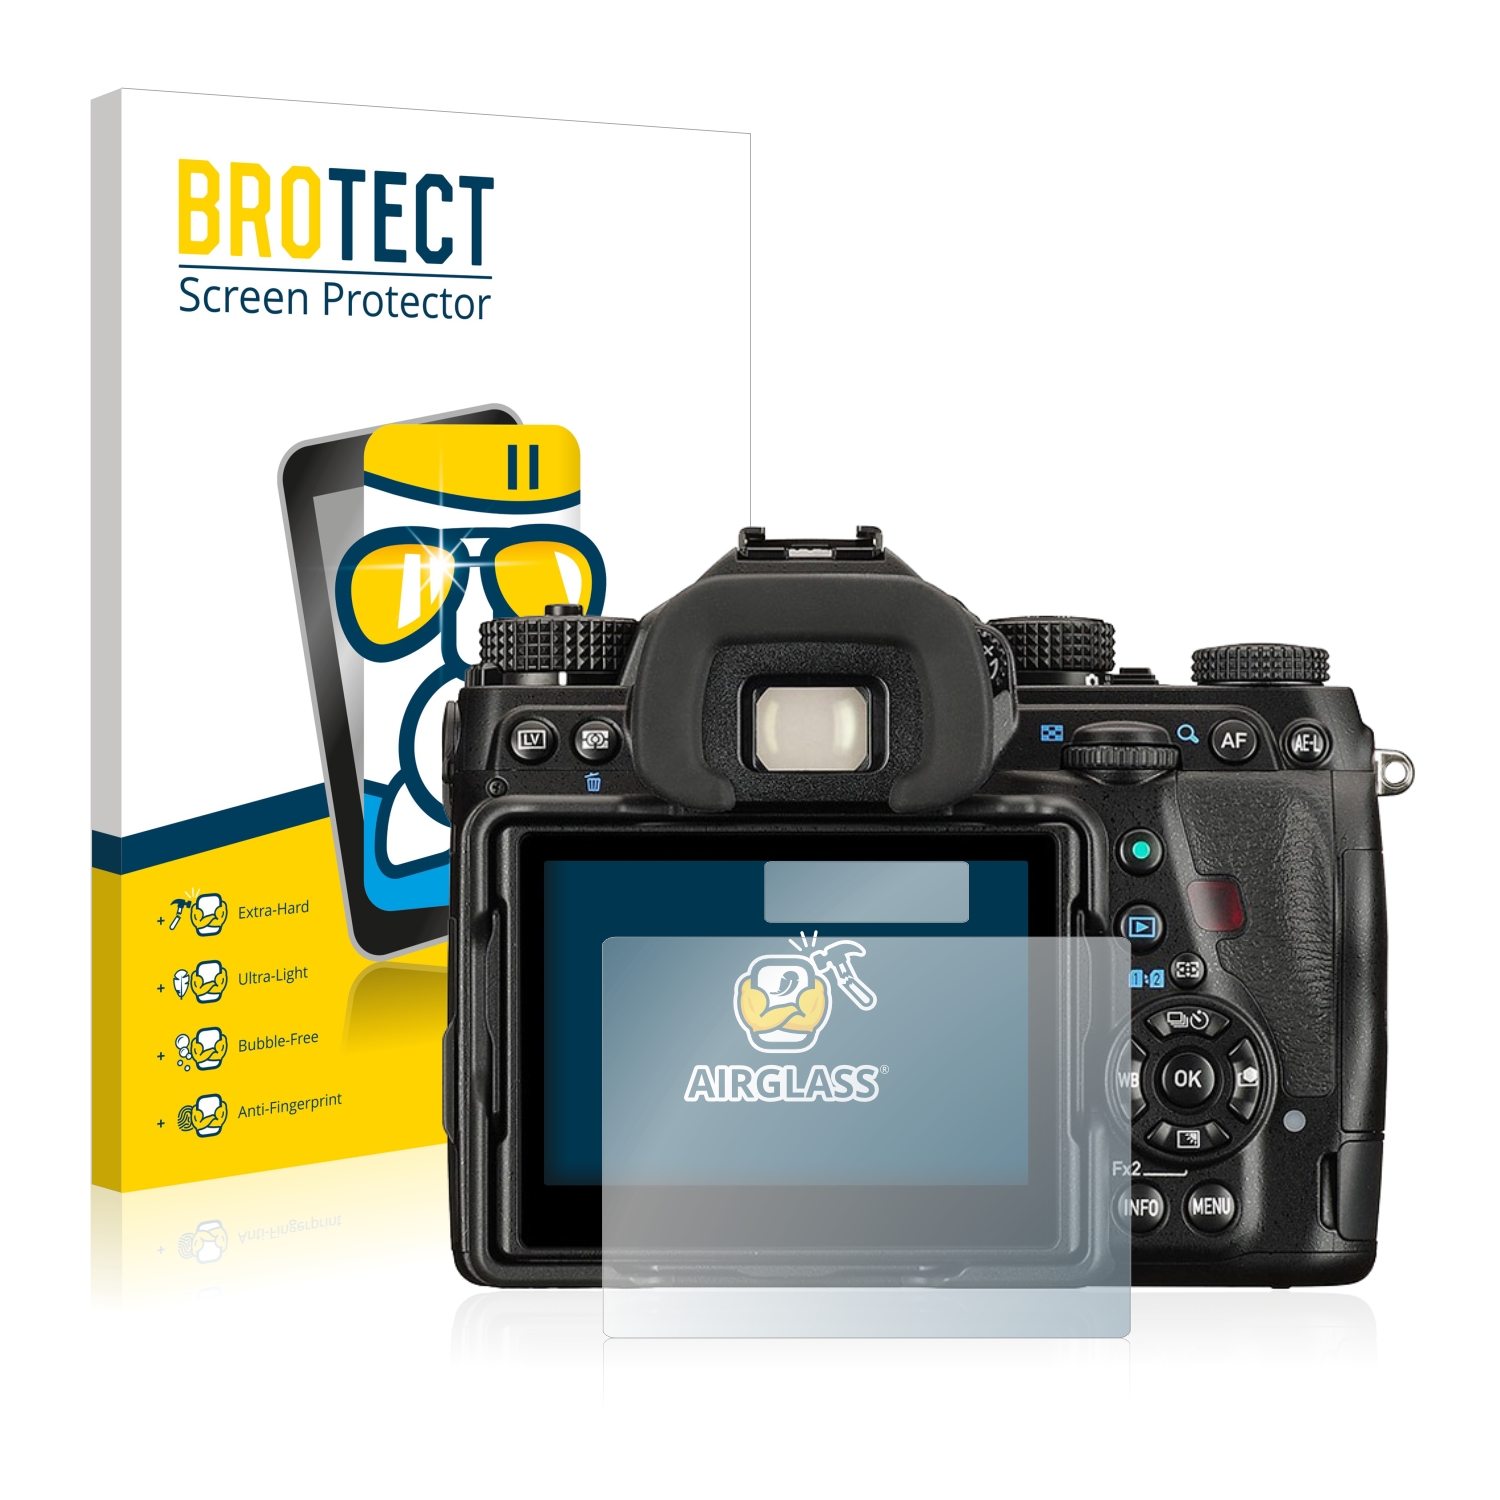 Hard-Coated Crystal-Clear 2X BROTECT HD-Clear Screen Protector for Pentax K-1 Mark II Dirt-Repellent 